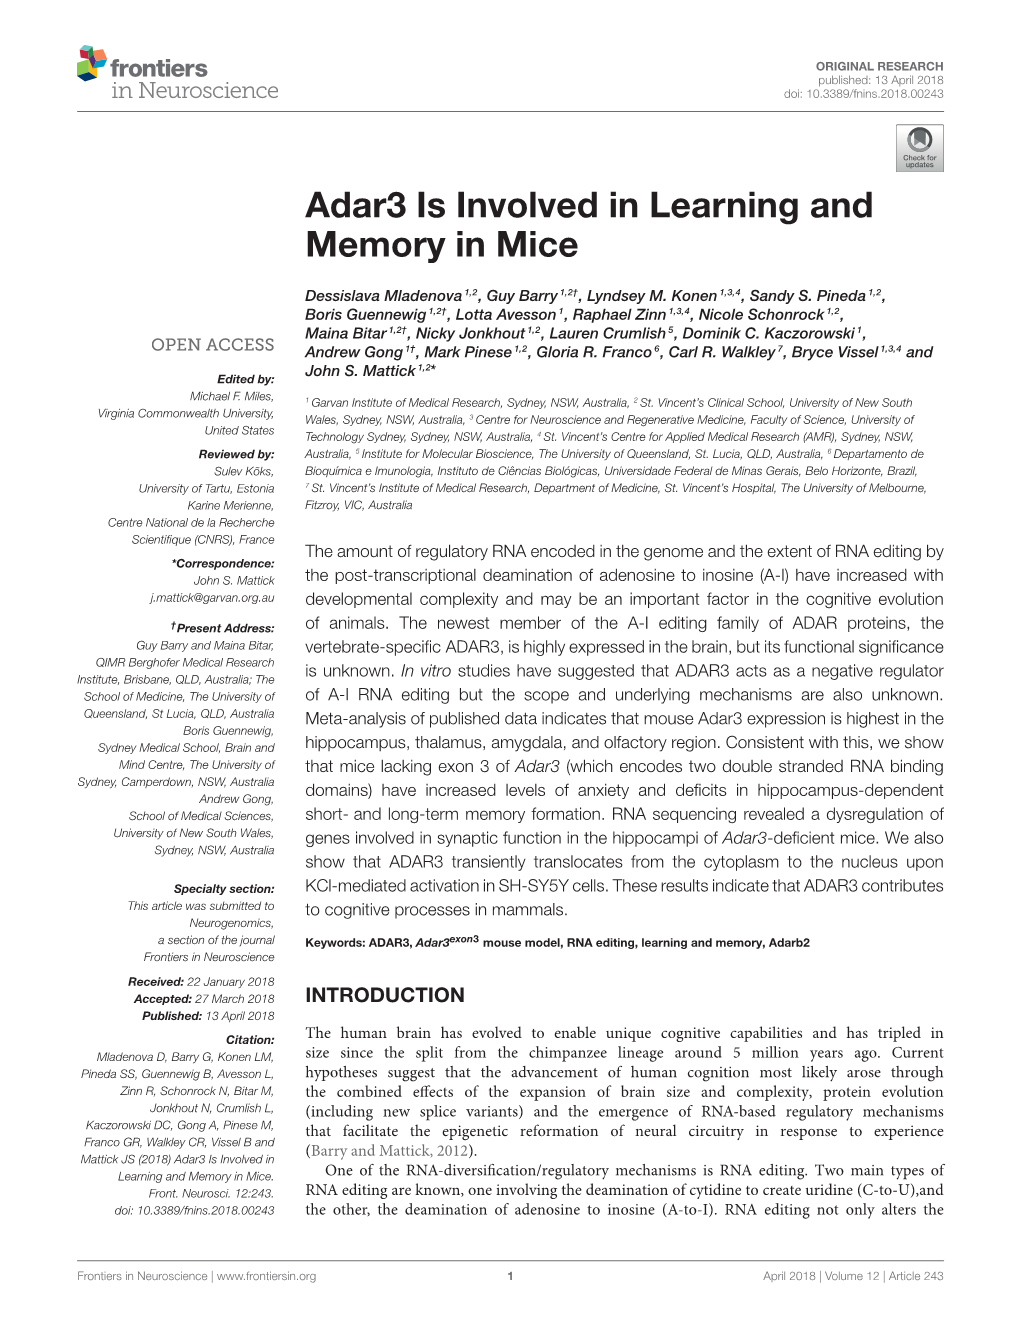 Adar3 Is Involved in Learning and Memory in Mice